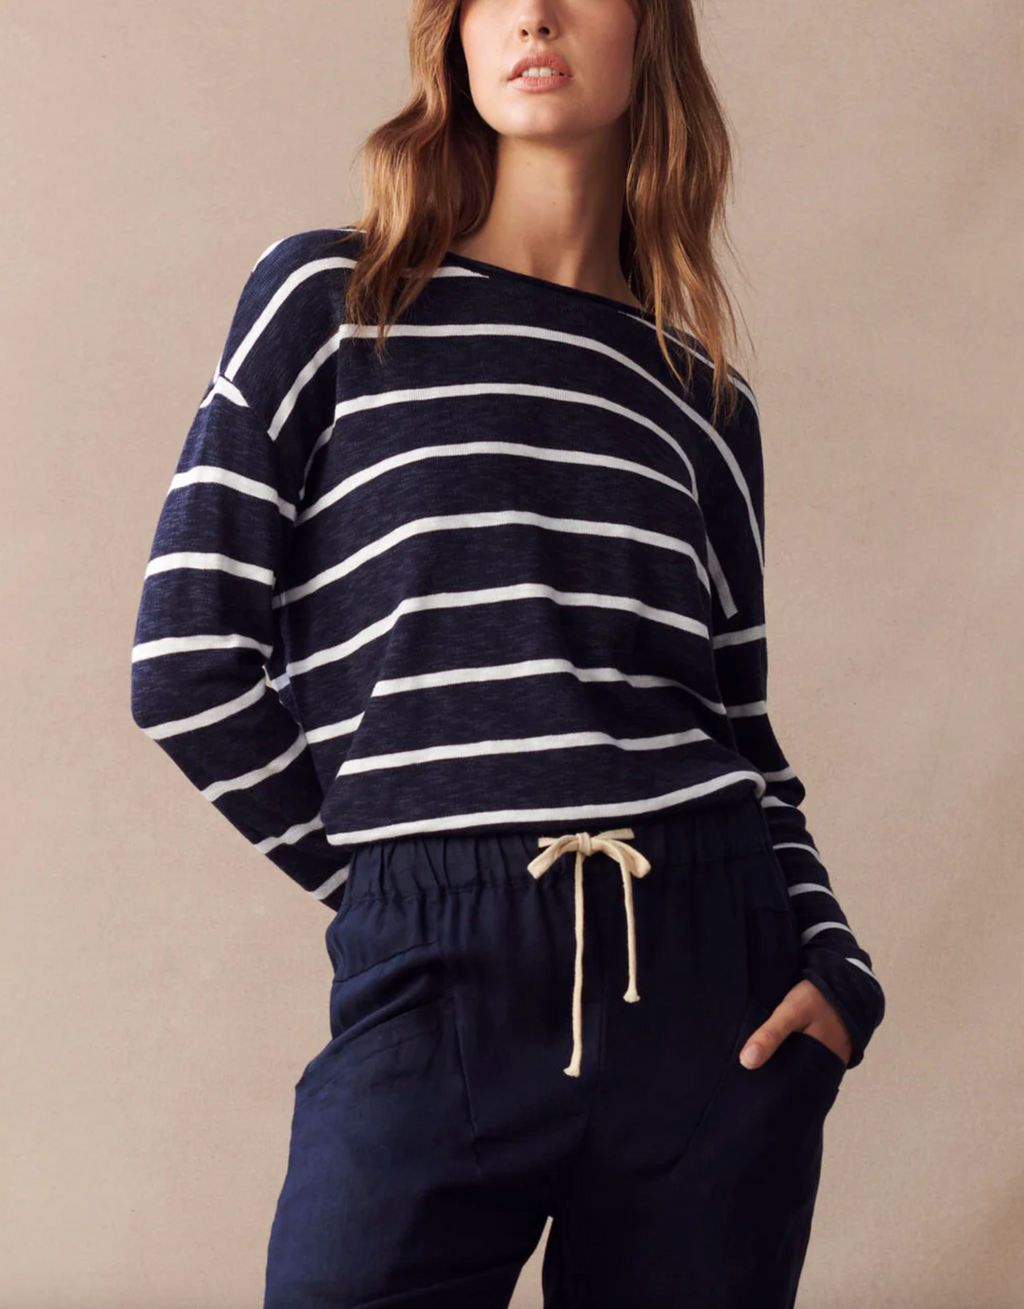 minnie top by little lies is a soft cotton blend long sleeve navy and white stripe top